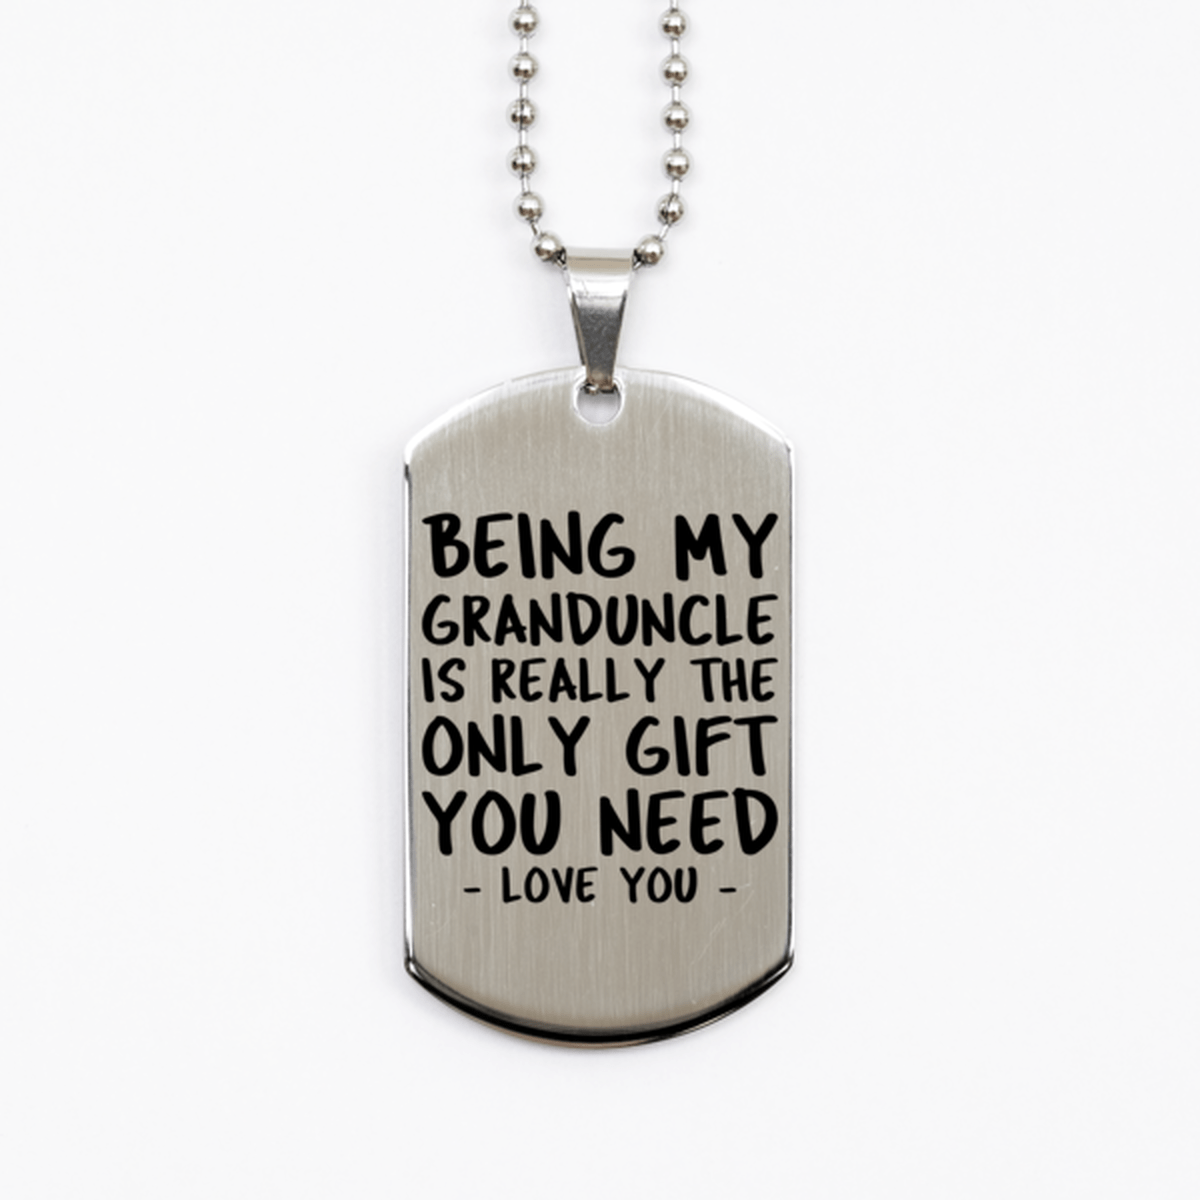 Funny Granduncle Silver Dog Tag Necklace, Being My Granduncle Is Really the Only Gift You Need, Best Birthday Gifts for Granduncle